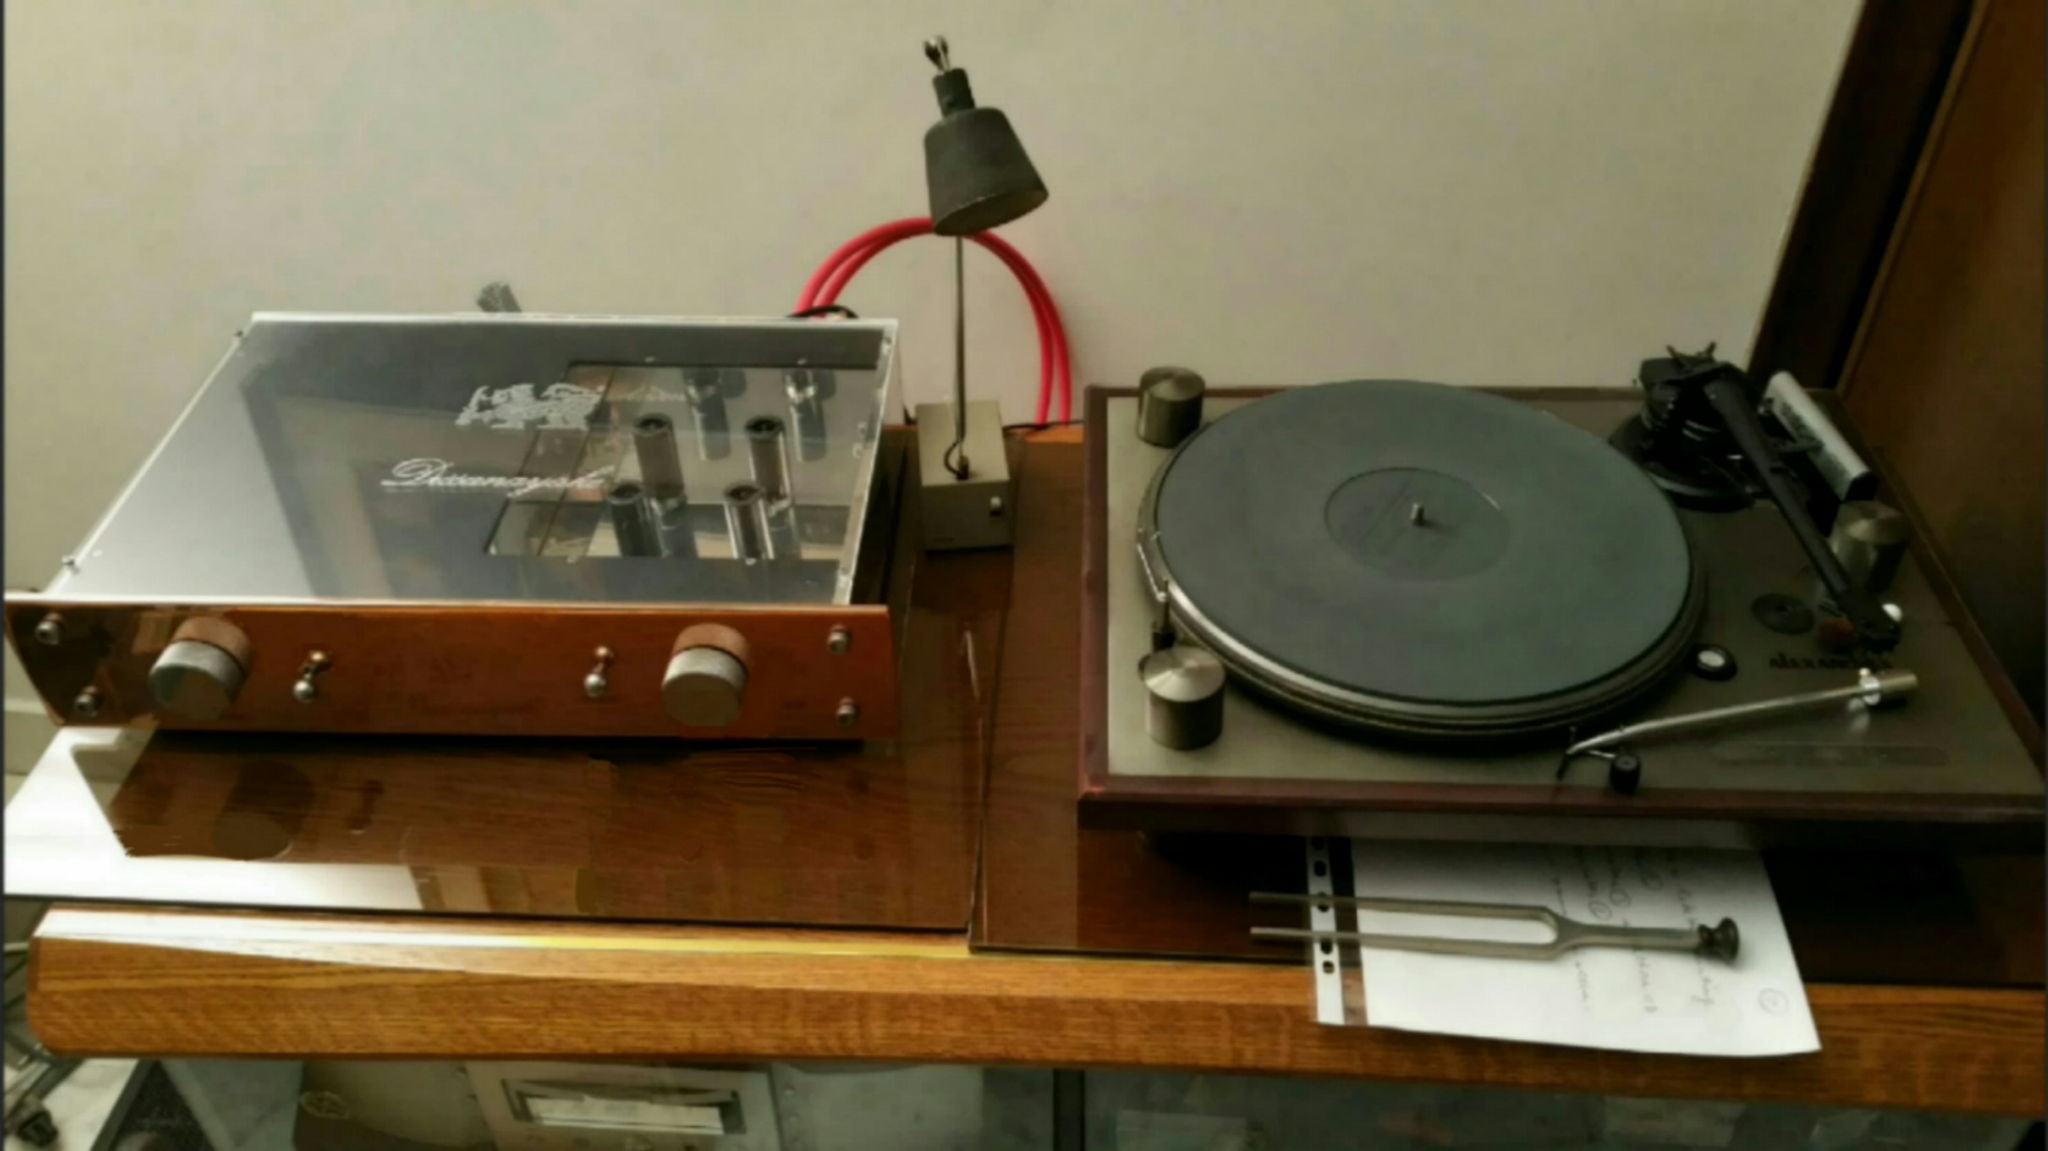 preamplifier & turntable